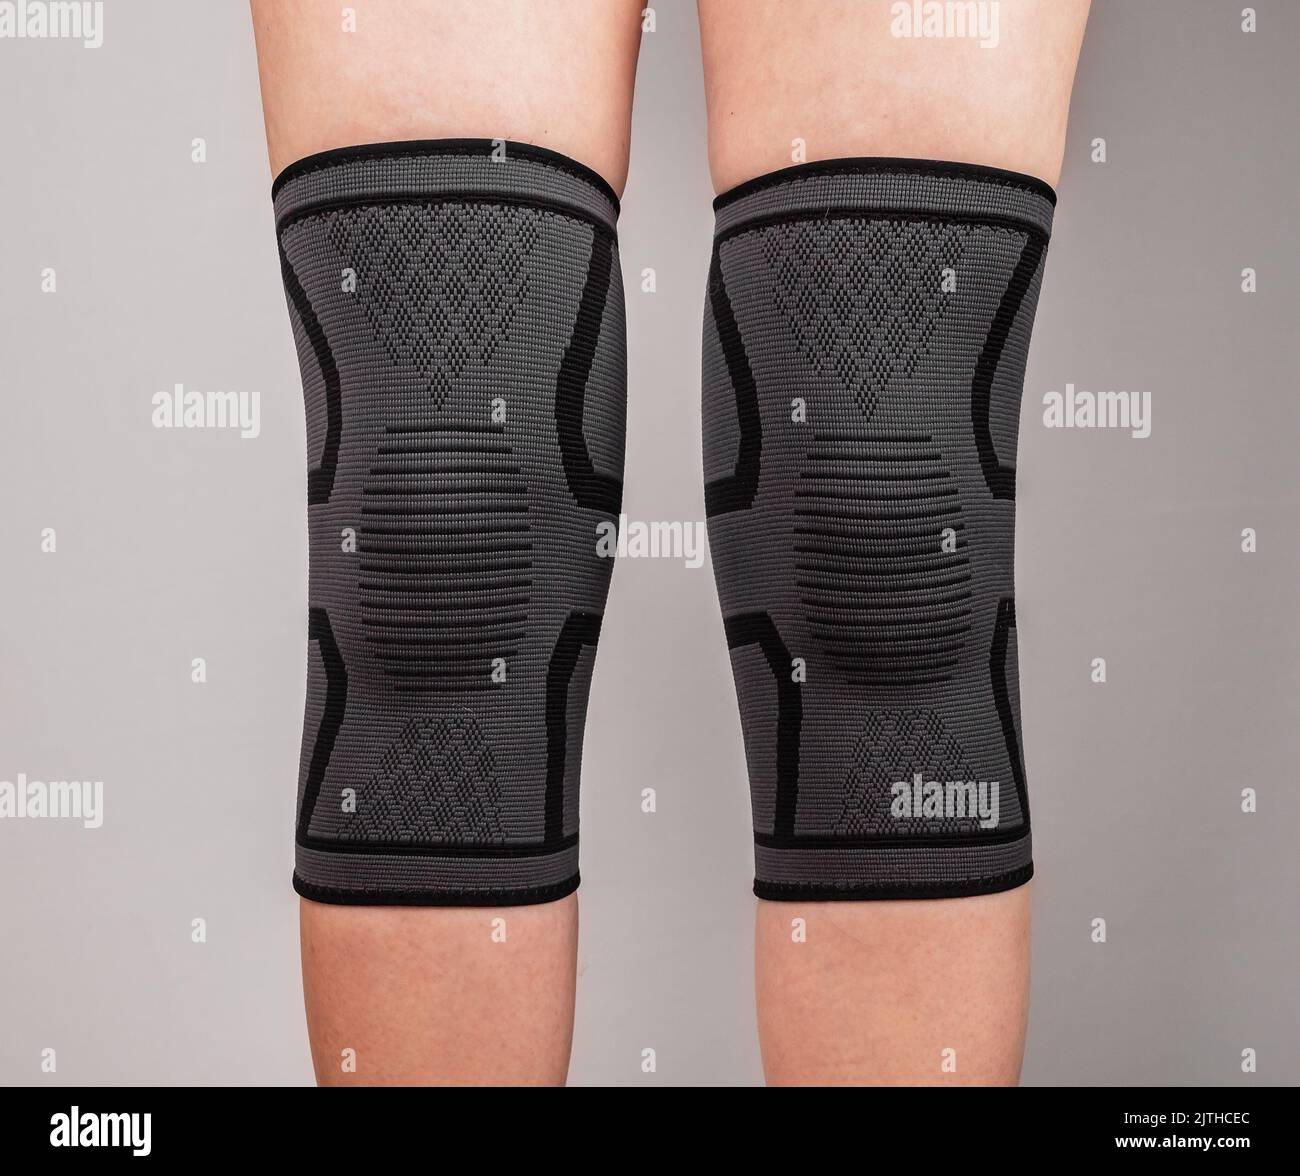 Woman legs in knee pads to relieve pain or discomfort, to prevent muscle, ligament strain, fracture. Patella braces. Health care concept High quality Stock Photo